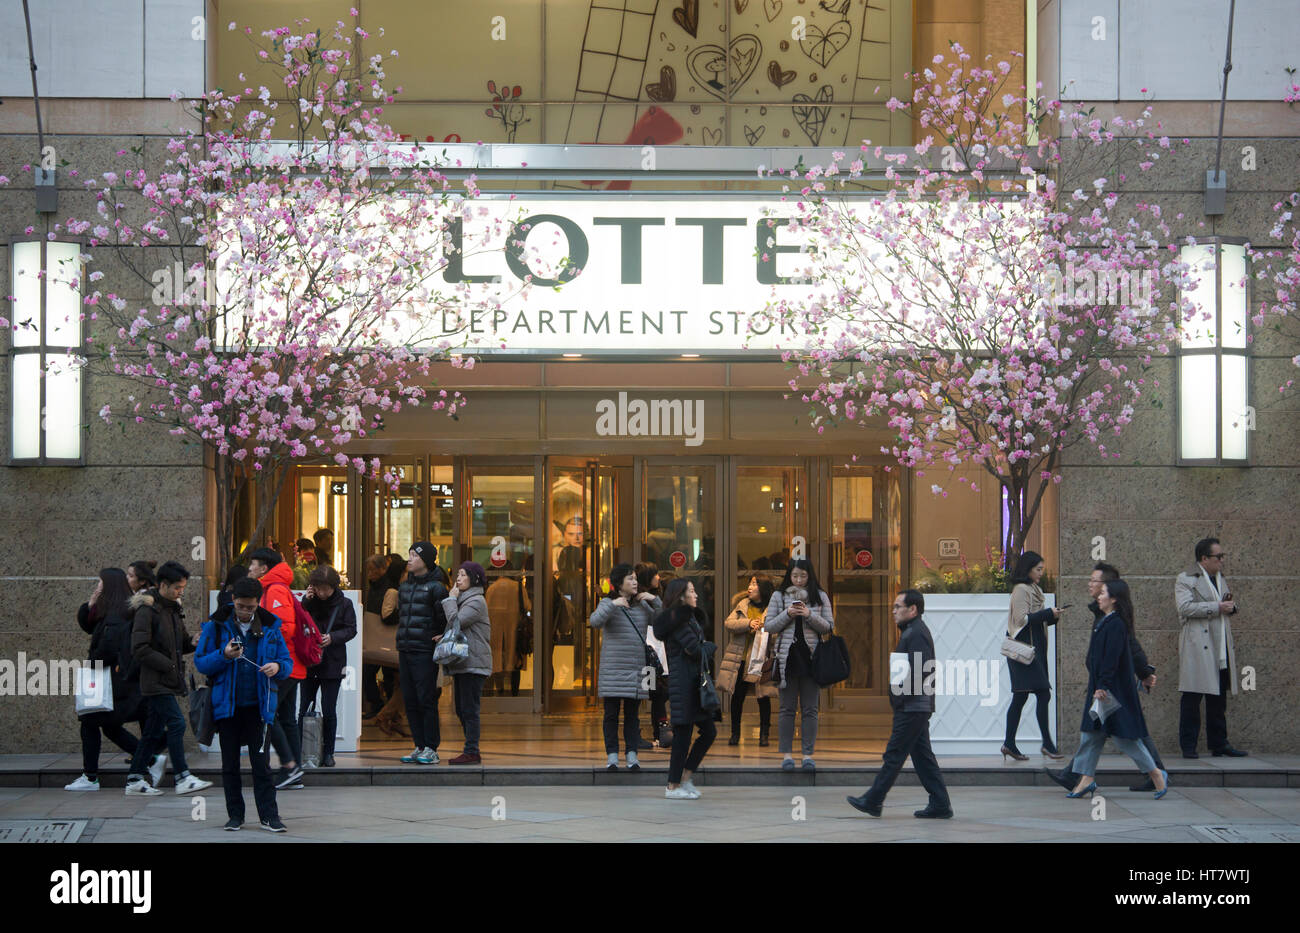 Lotte Department Store, Mar 7, 2017 : Lotte department store is seen in Seoul, South Korea. China ordered last week their travel agencies to stop selling group tours to South Korea after South Korean defence ministry completed a deal with Lotte Group to deploy a Terminal High Altitude Area Defense (THAAD) battery of the U.S. Army on a Lotte golf course, about 260 km southeast of Seoul. The U.S. and South Korea had agreed to station the anti-missile battery with a high-powered radar to counter missile threats from North Korea but China opposed the deployment as they asserted the United States w Stock Photo